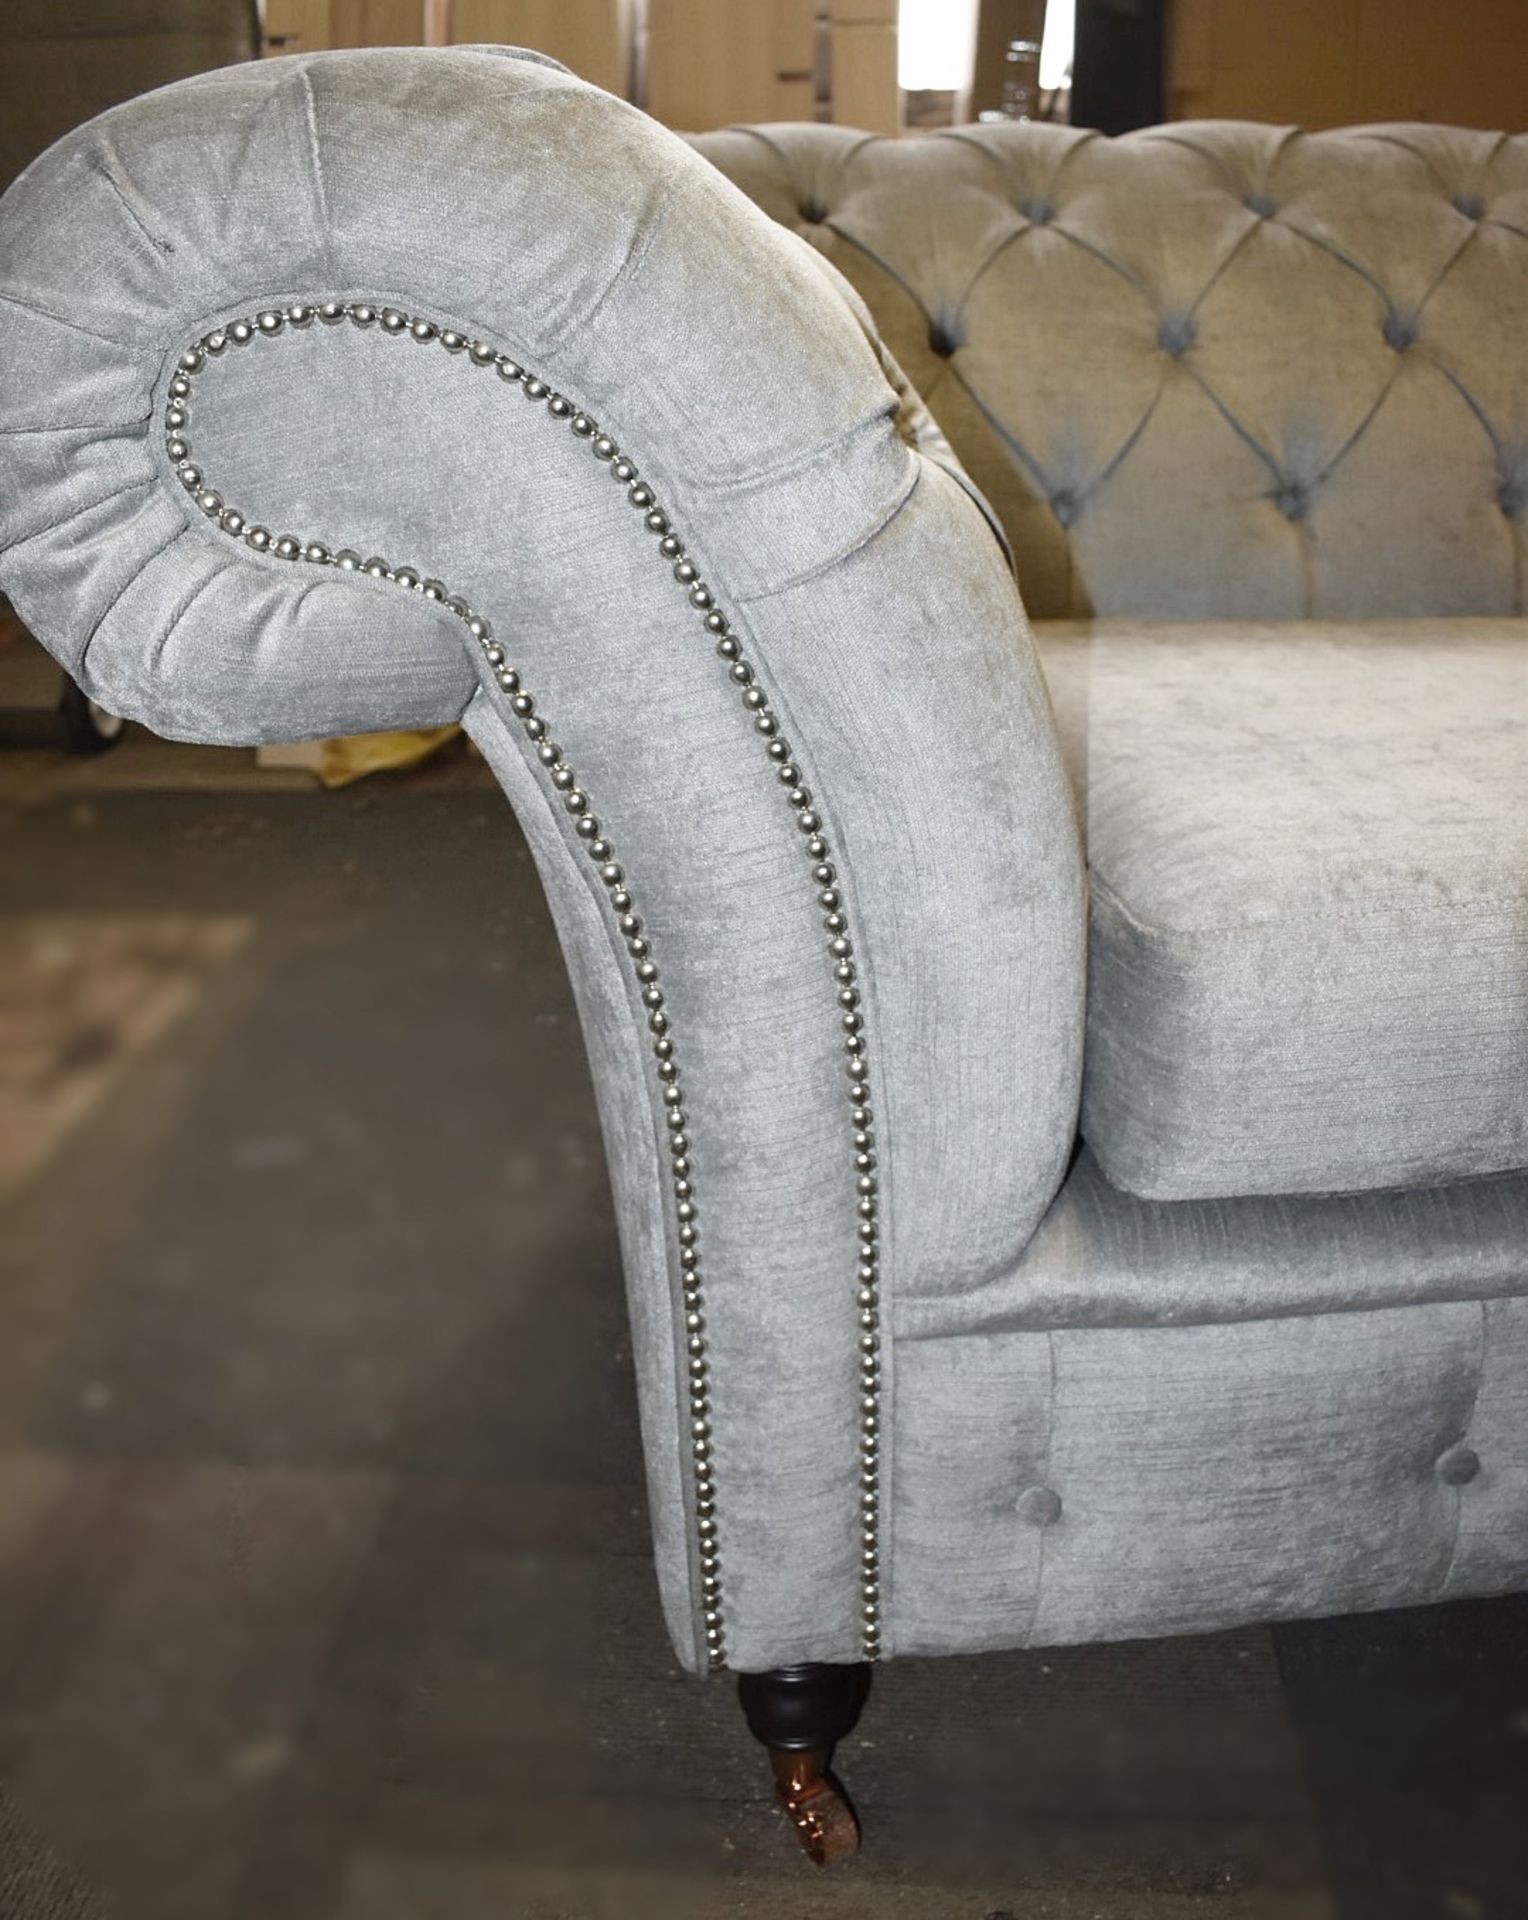 1 x Chesterfield-style Velvet Upholstered Sofa, on Castors, 2.2-Metres Wide  - Luxury Furniture - Image 8 of 14